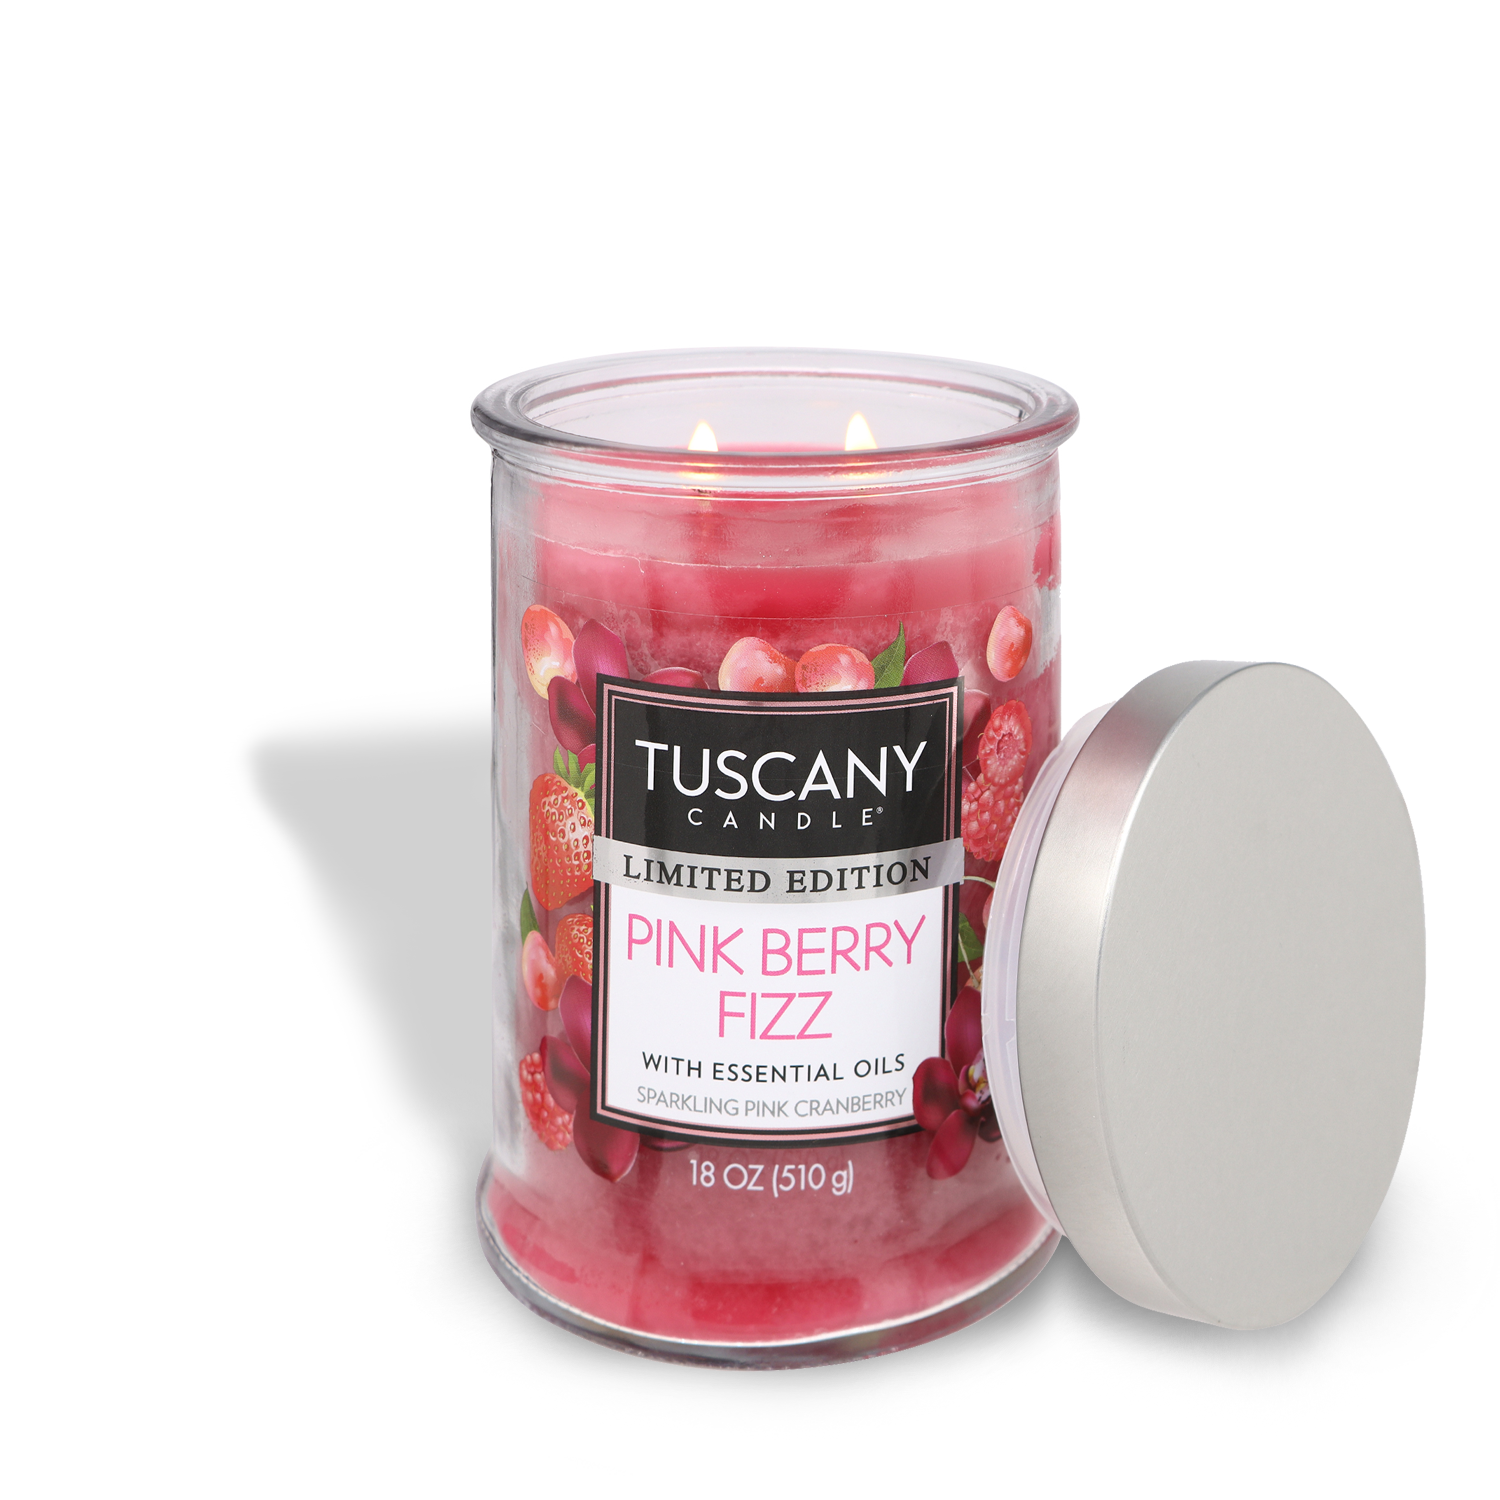 Enjoy the sweet aroma of Tuscany Candle® SEASONAL Pink Berry Fizz Long-Lasting Scented Jar Candle (18 oz).